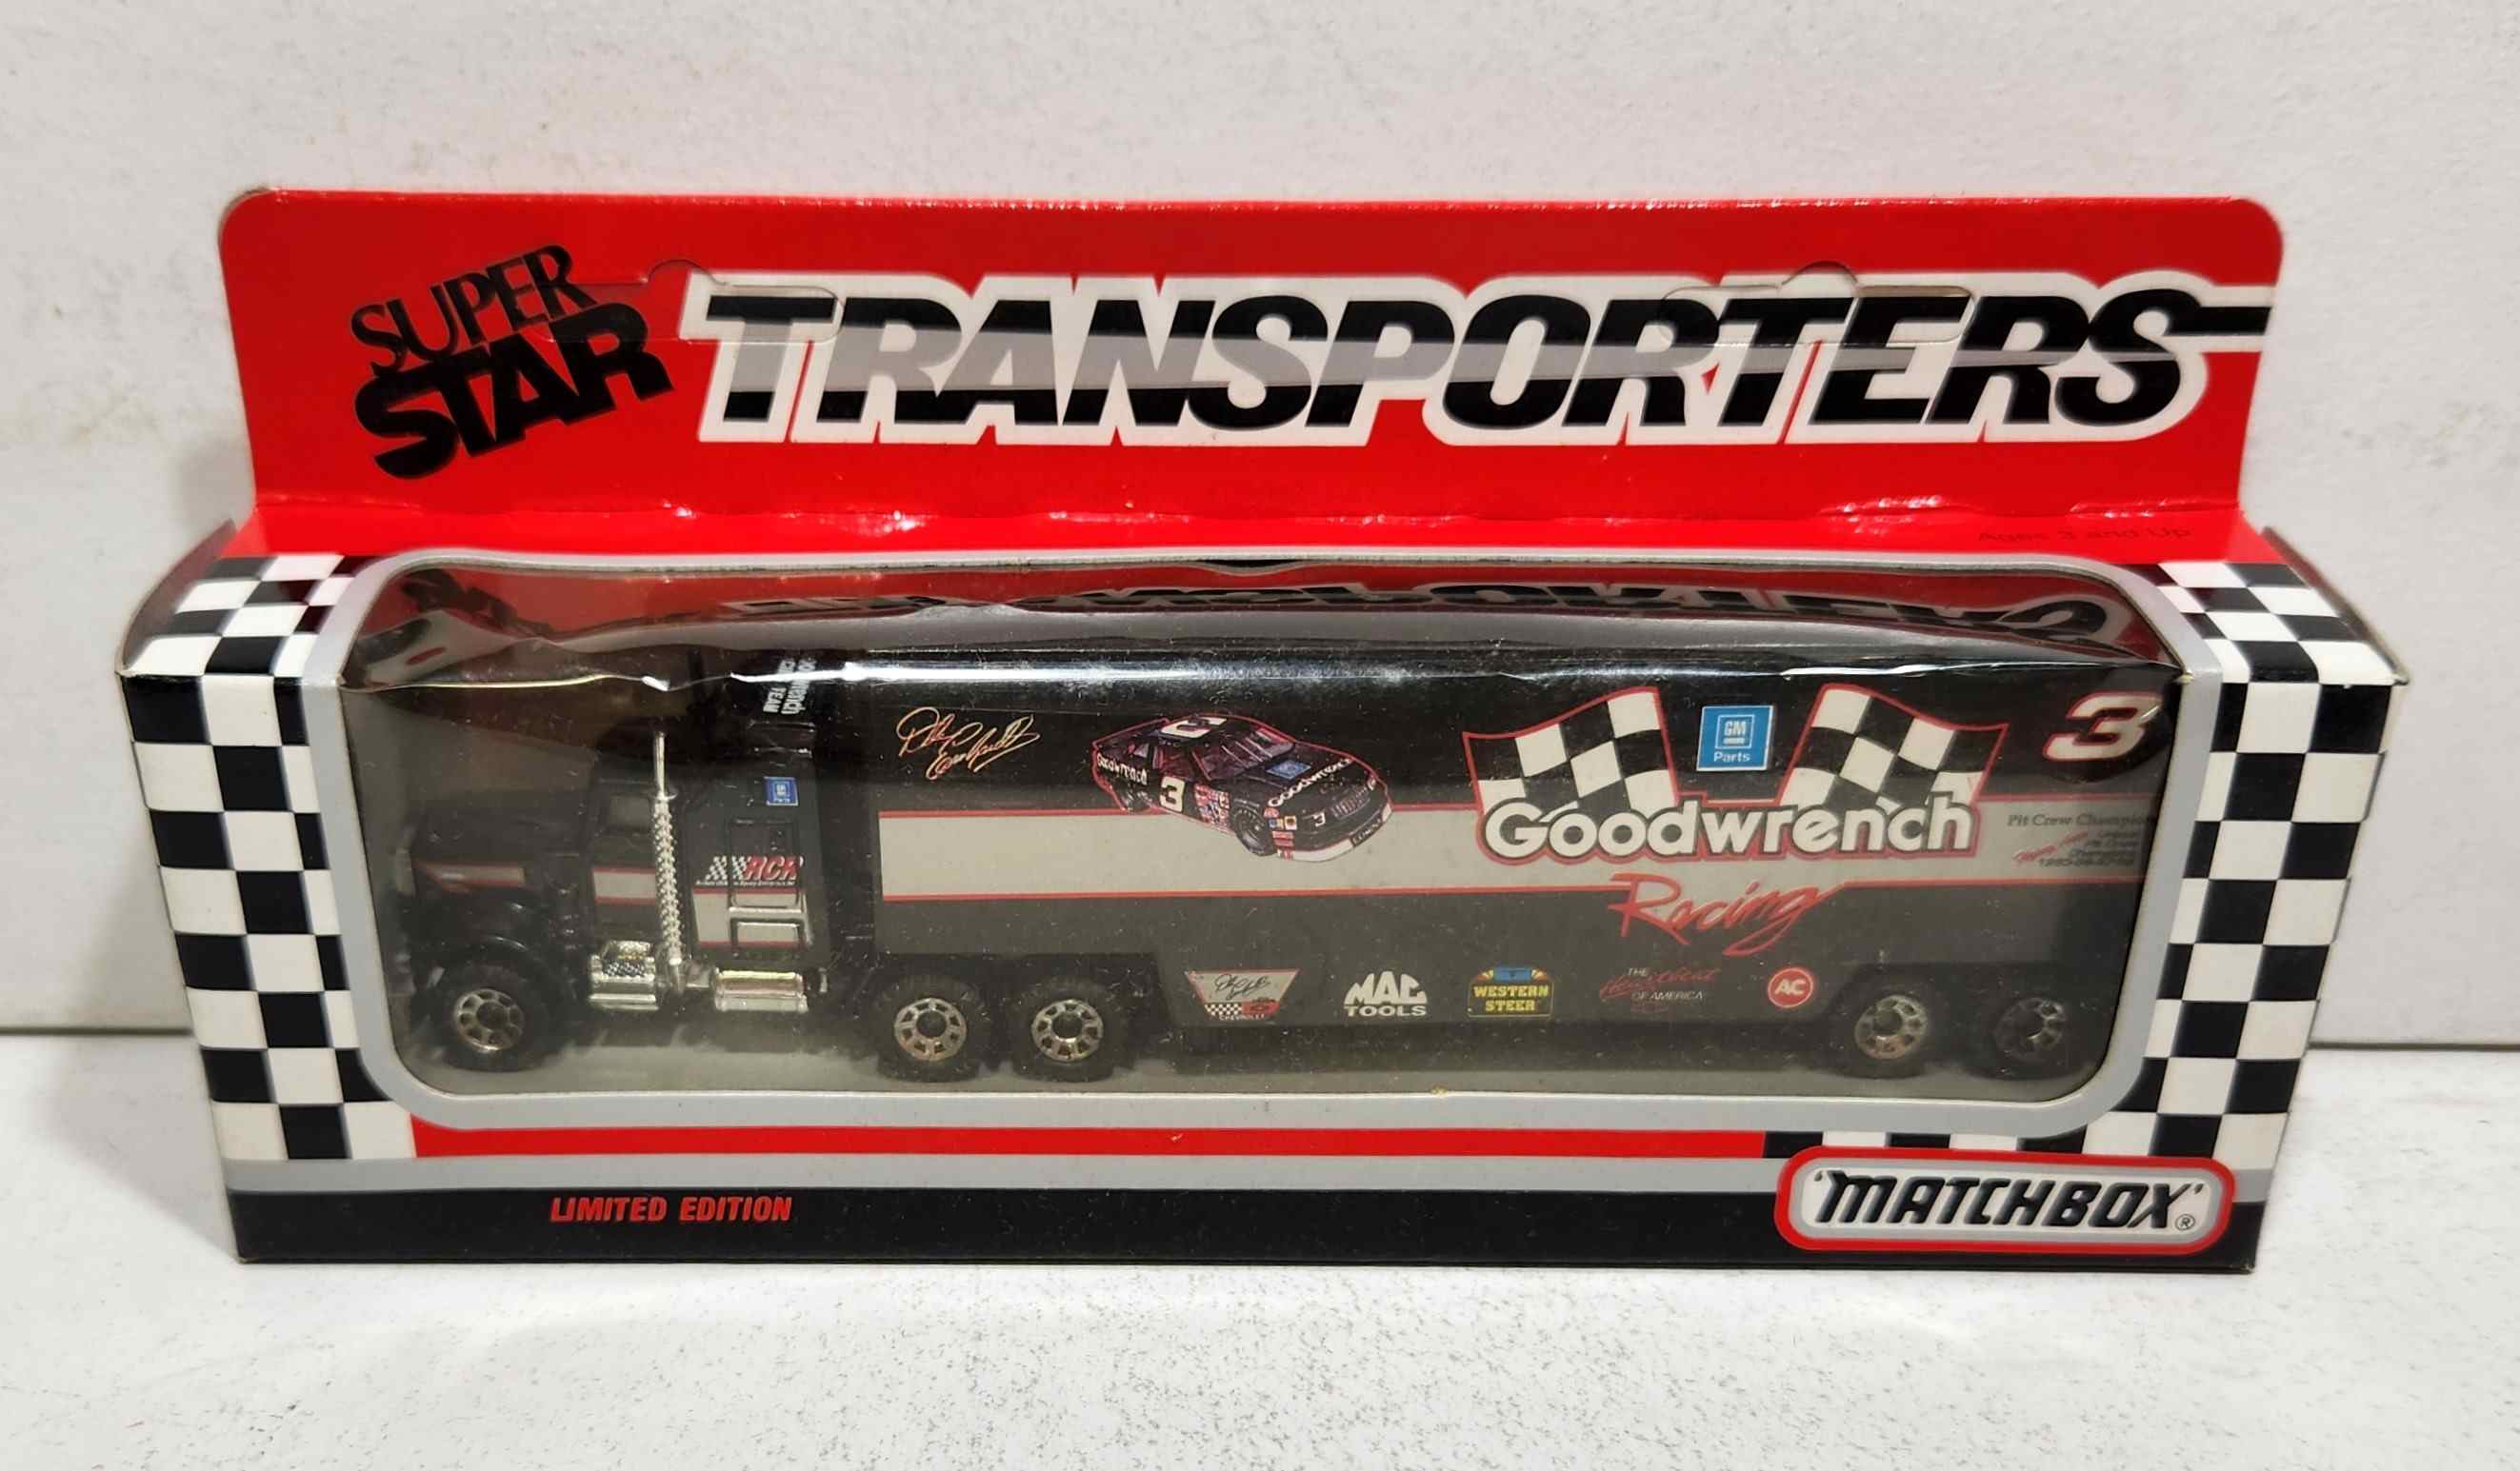 1992 Dale Earnhardt 1/87th Goodwrench Transporter